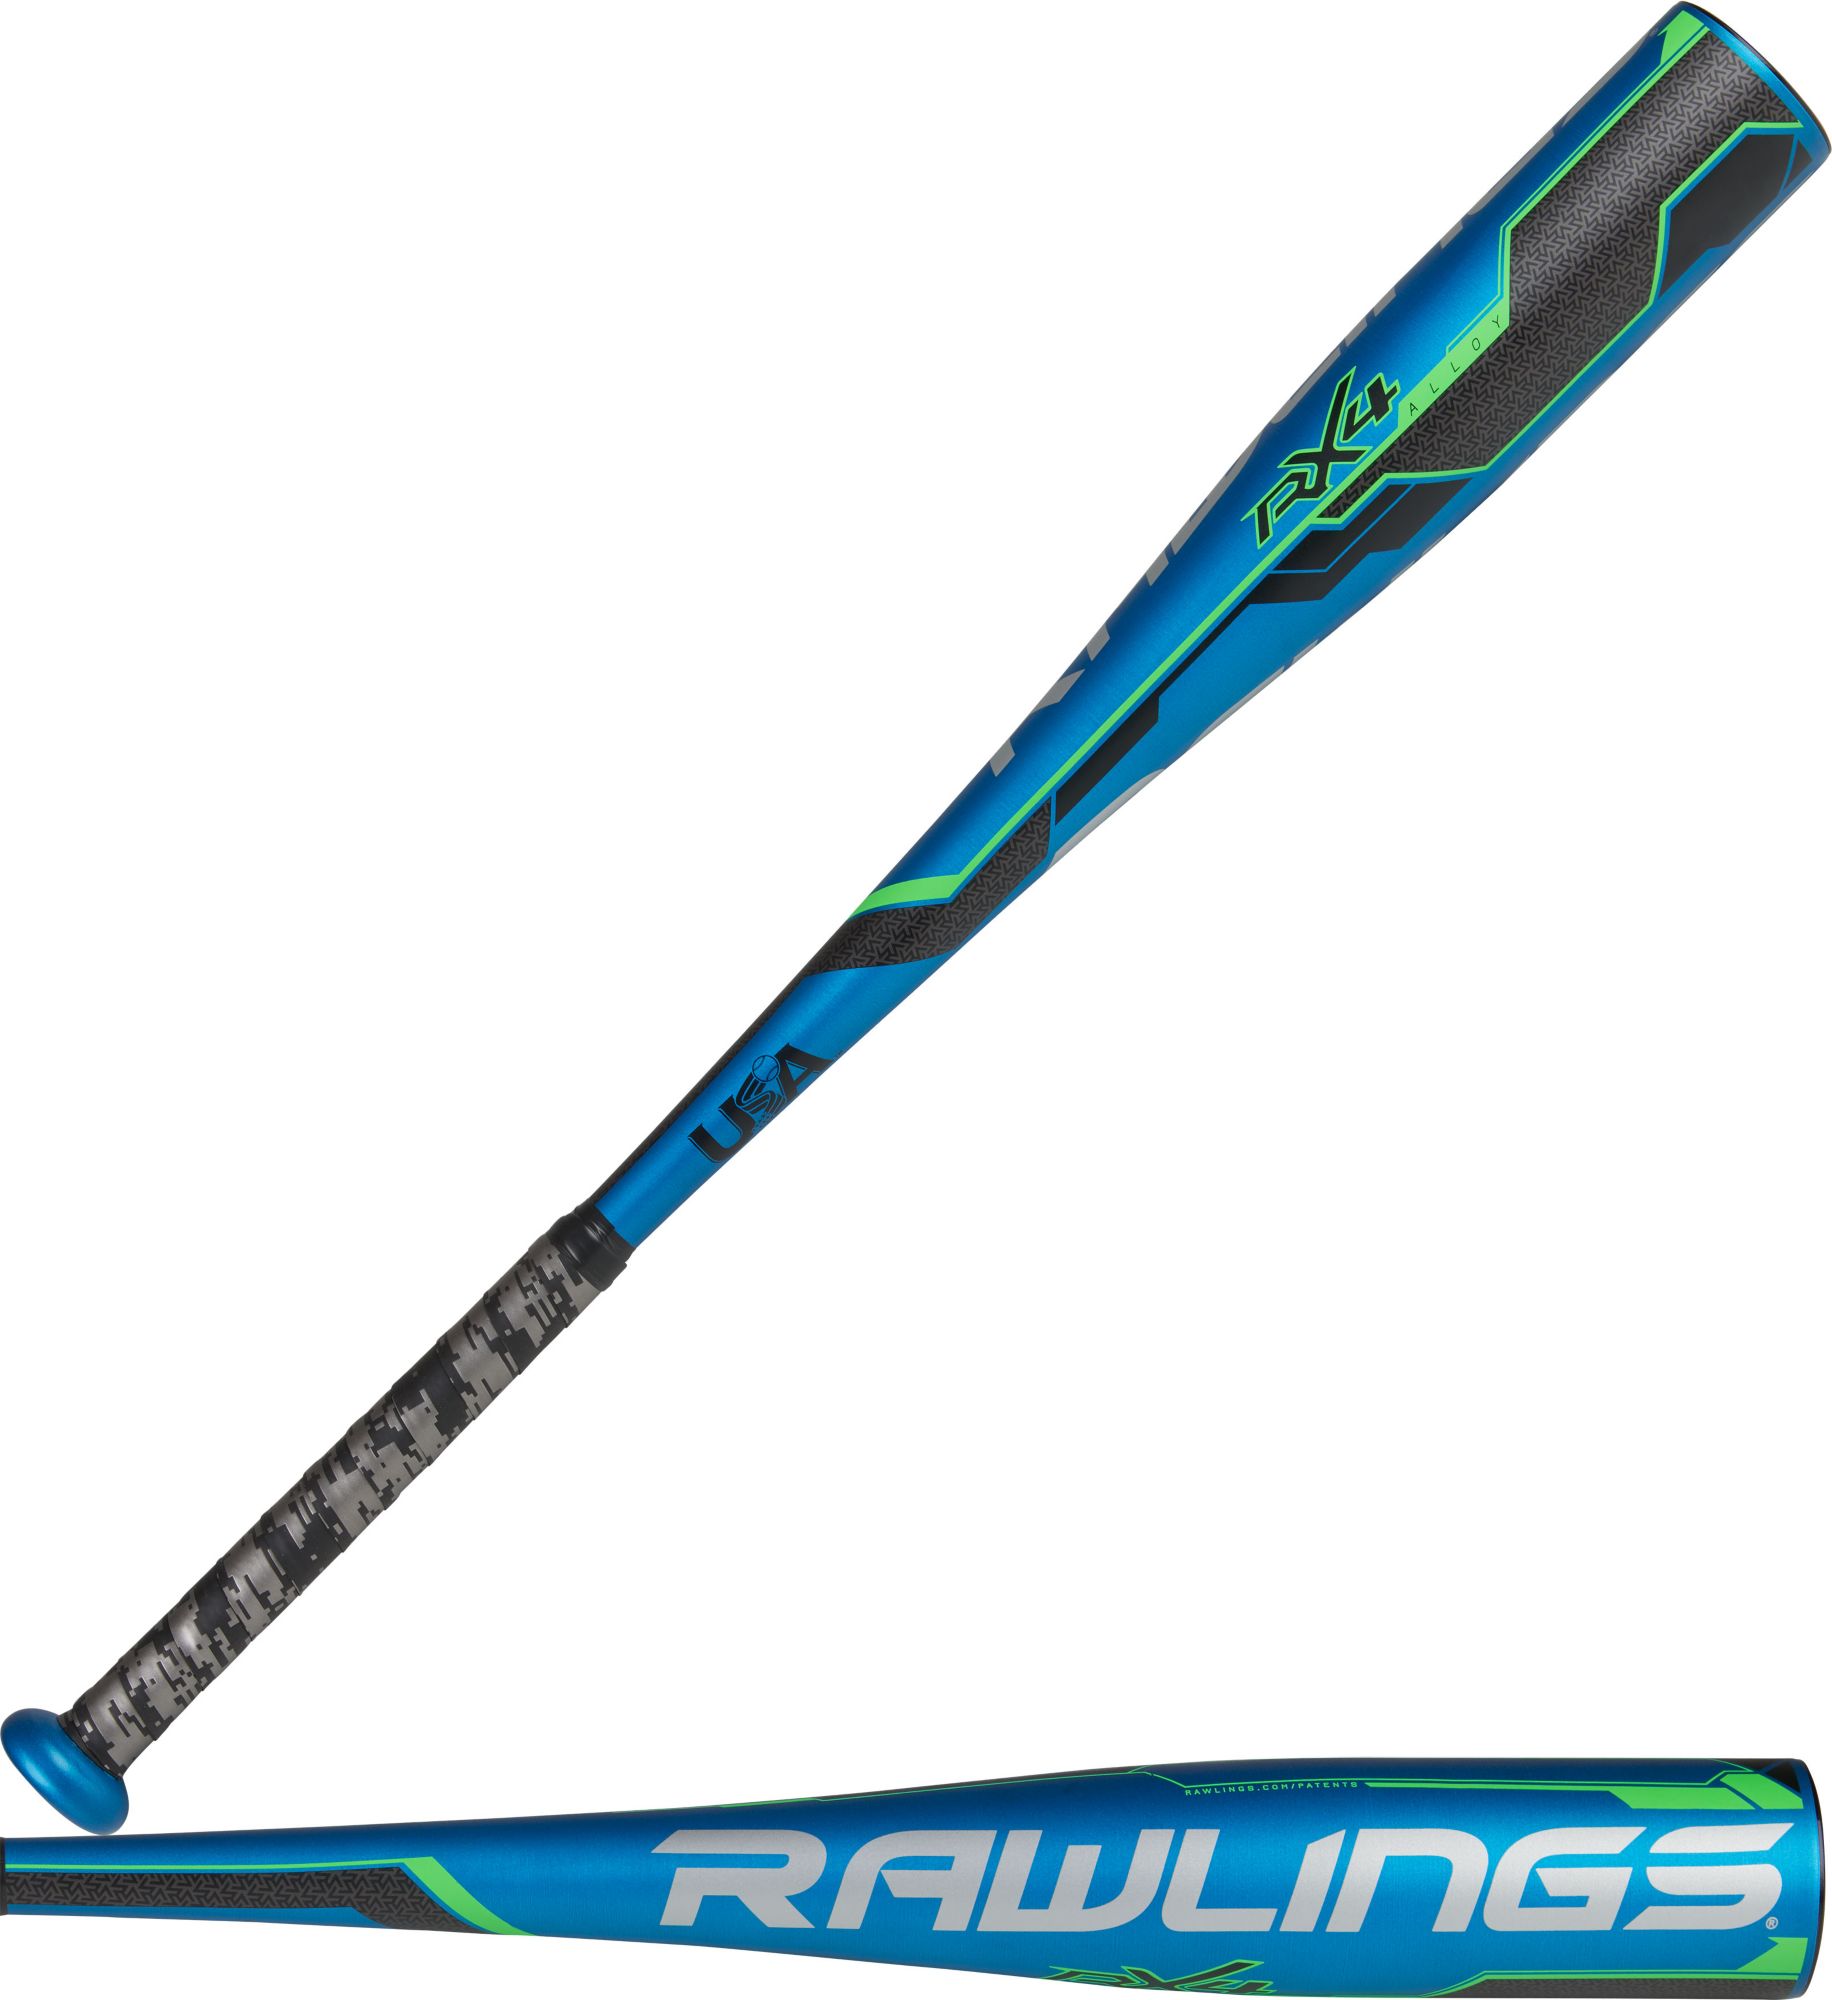 Rawlings RX4 USA Youth Bat 2018 (-8) | DICK'S Sporting Goods